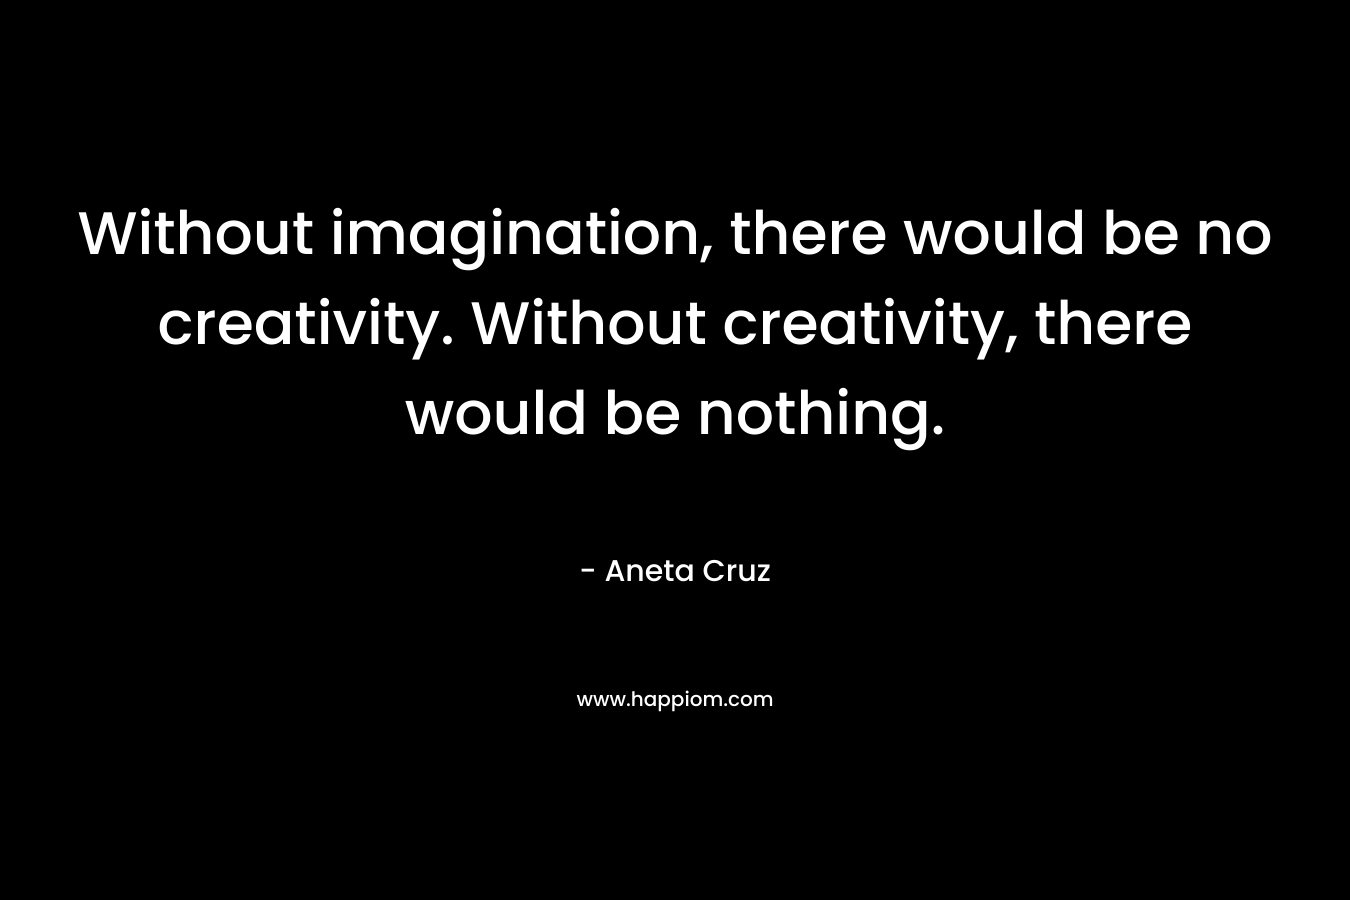 Without imagination, there would be no creativity. Without creativity, there would be nothing.